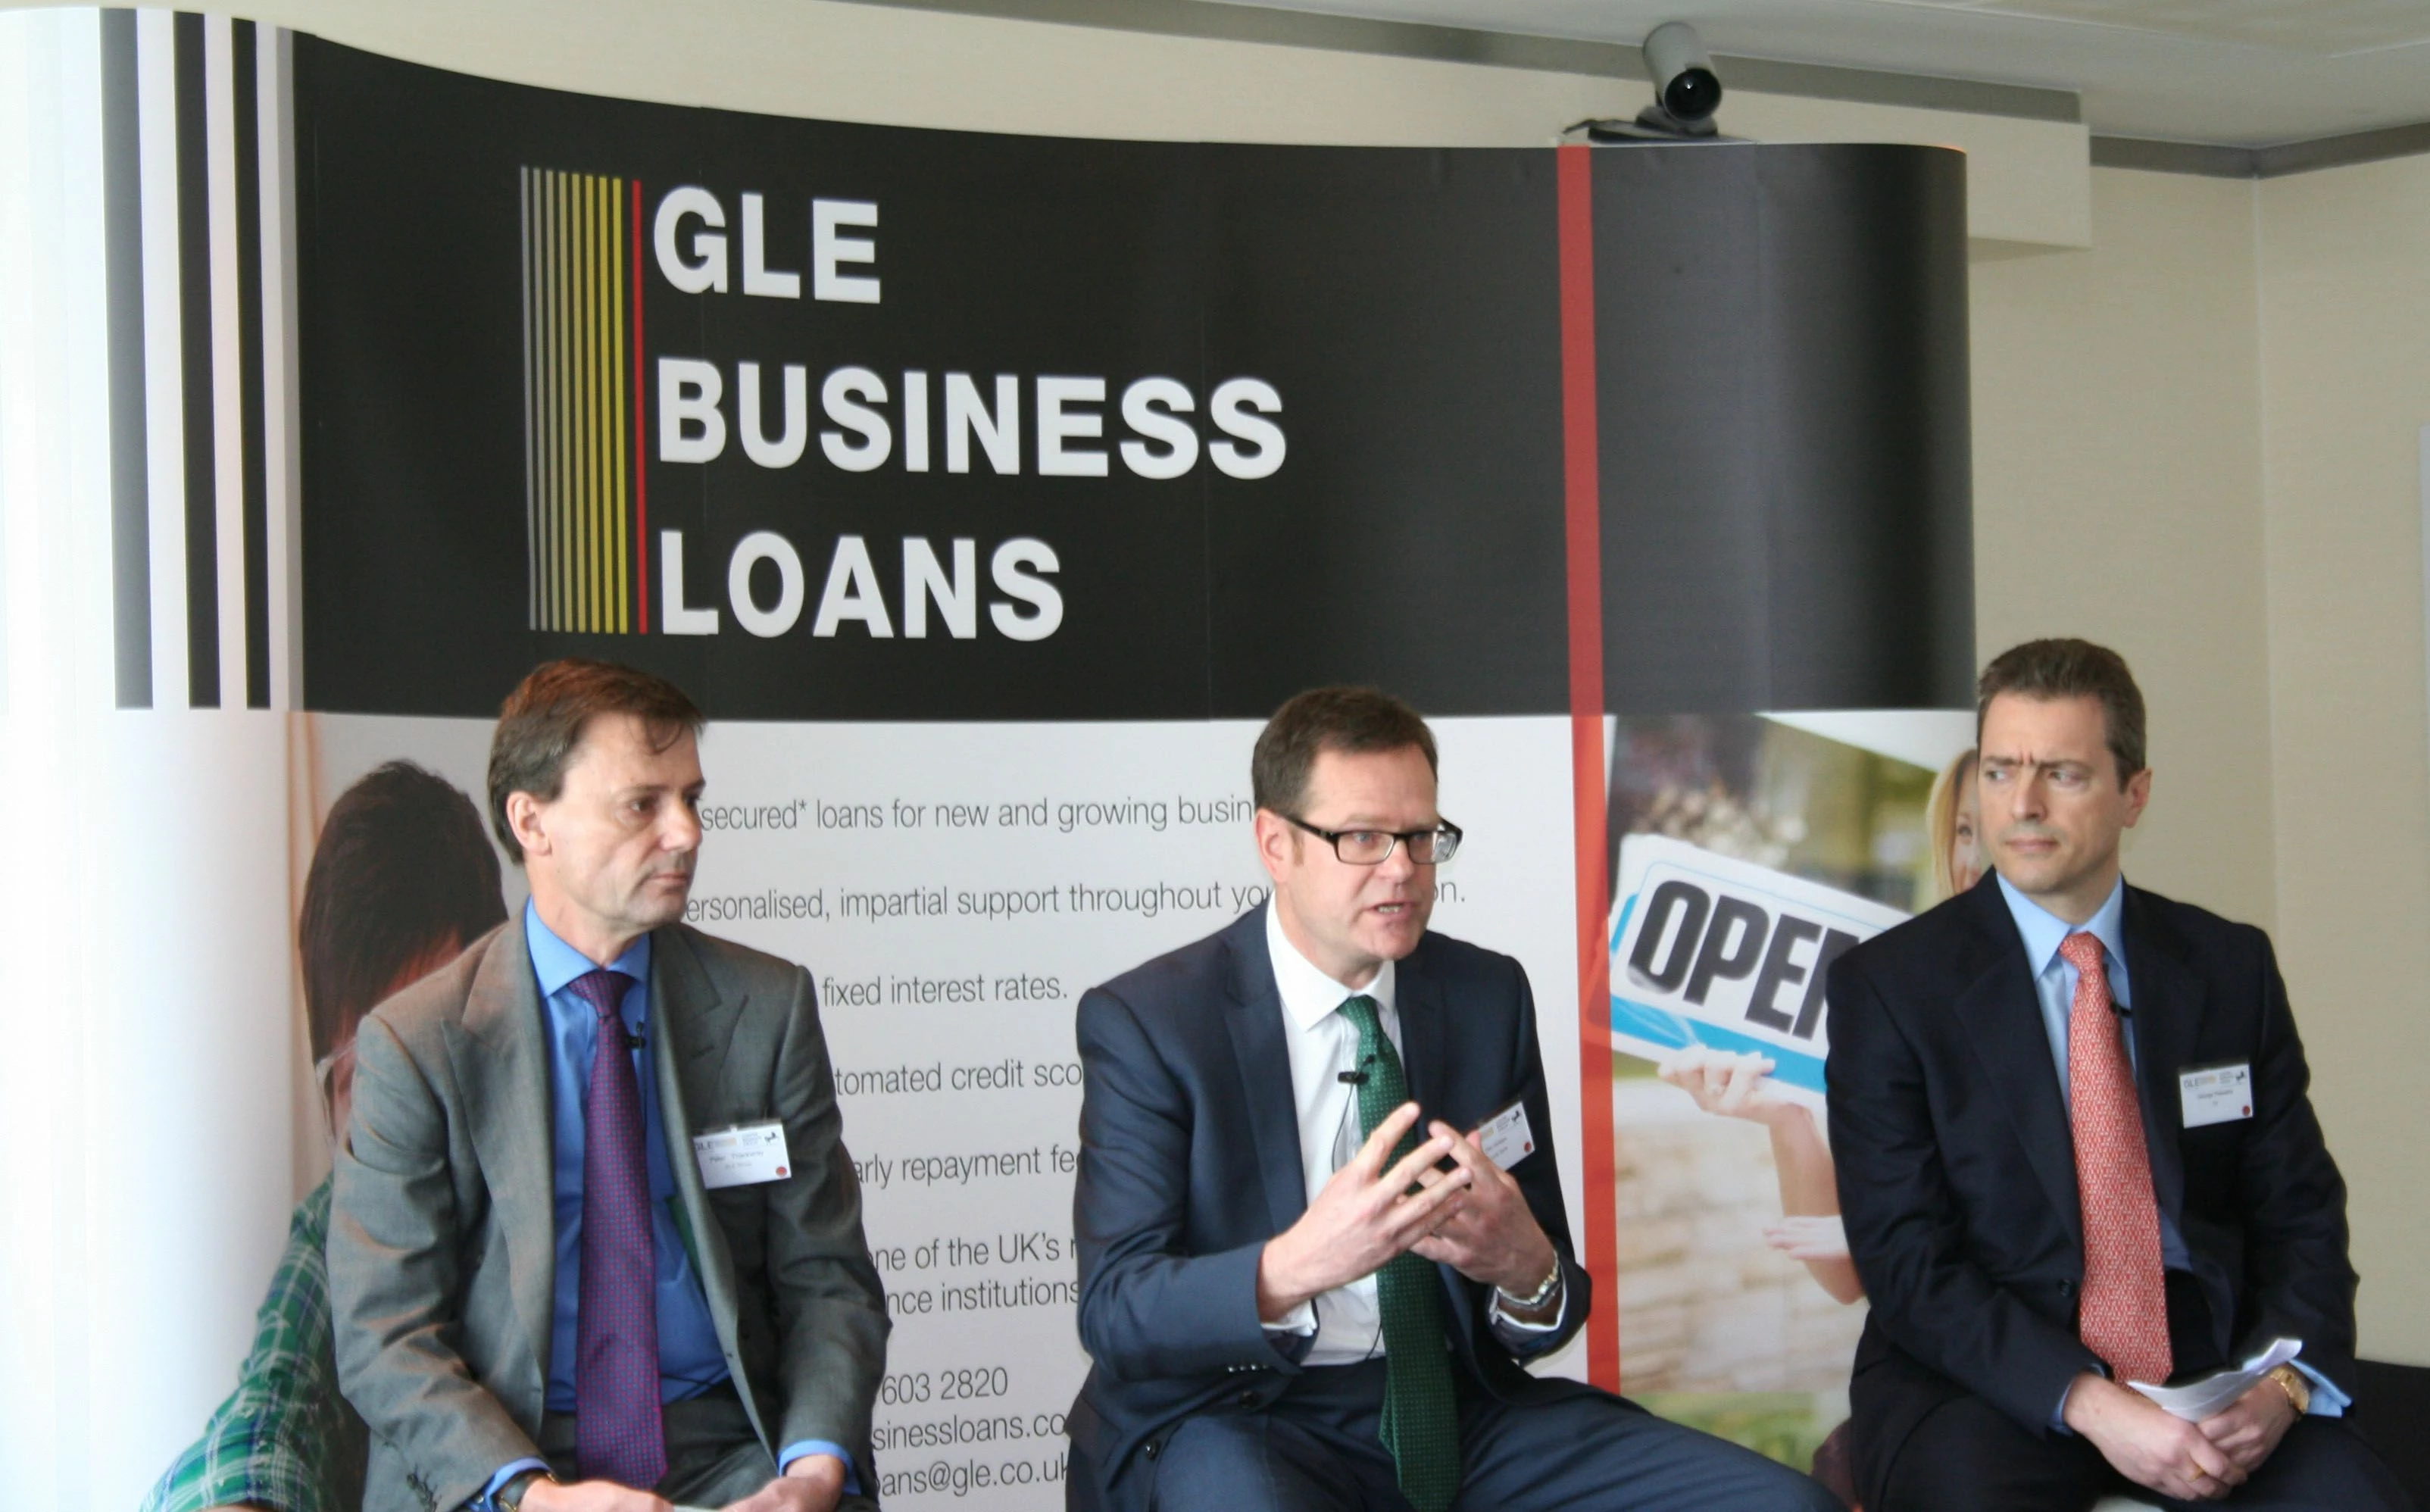 In order to launch the London Loan Fund, GLE oneLondon, the EIF and Lloyds Bank held a joint event o